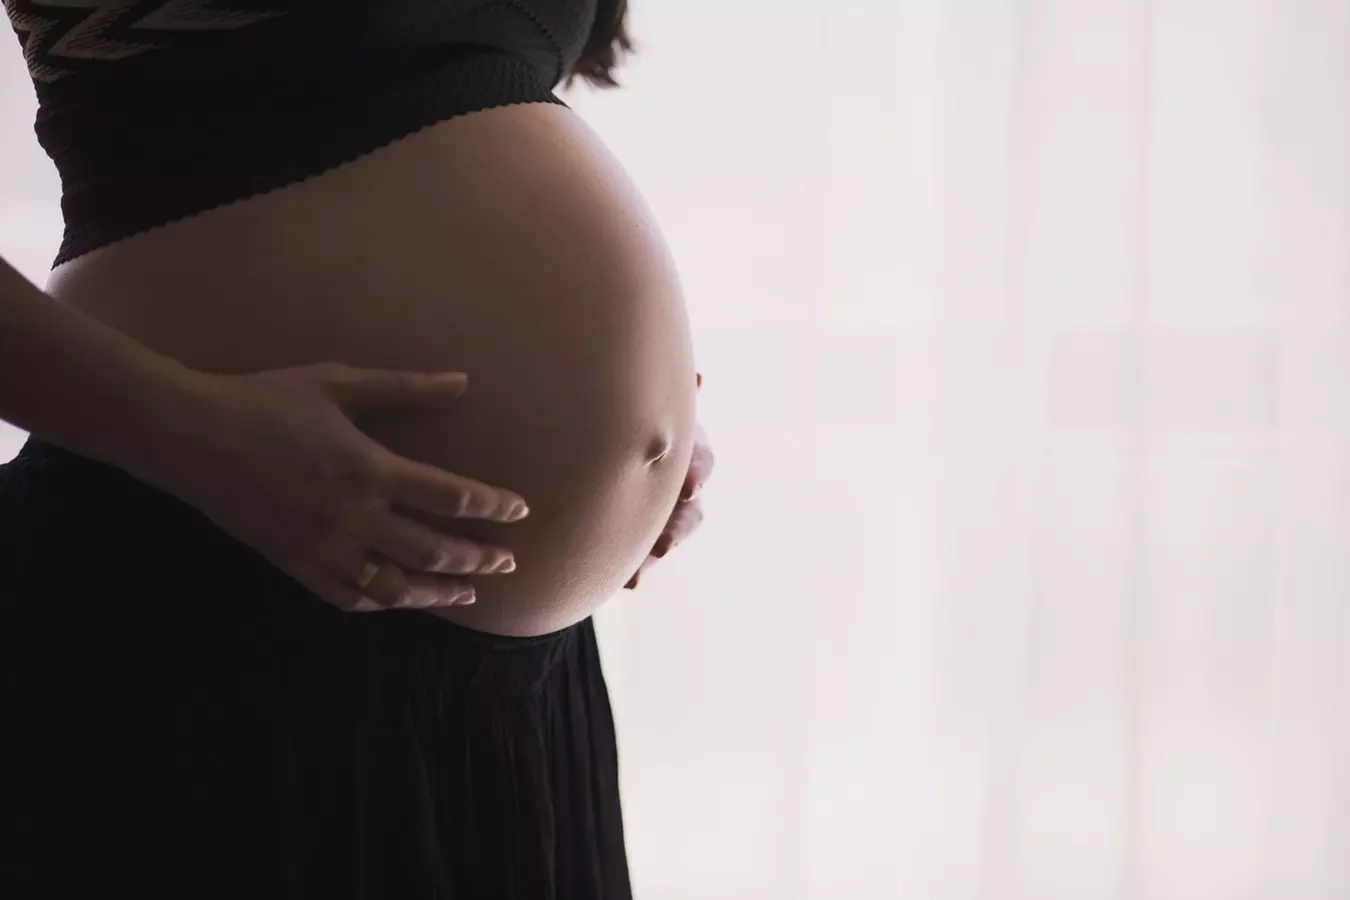 Connecticut Bill Attacks Advertising for Pro-life Pregnancy Centers